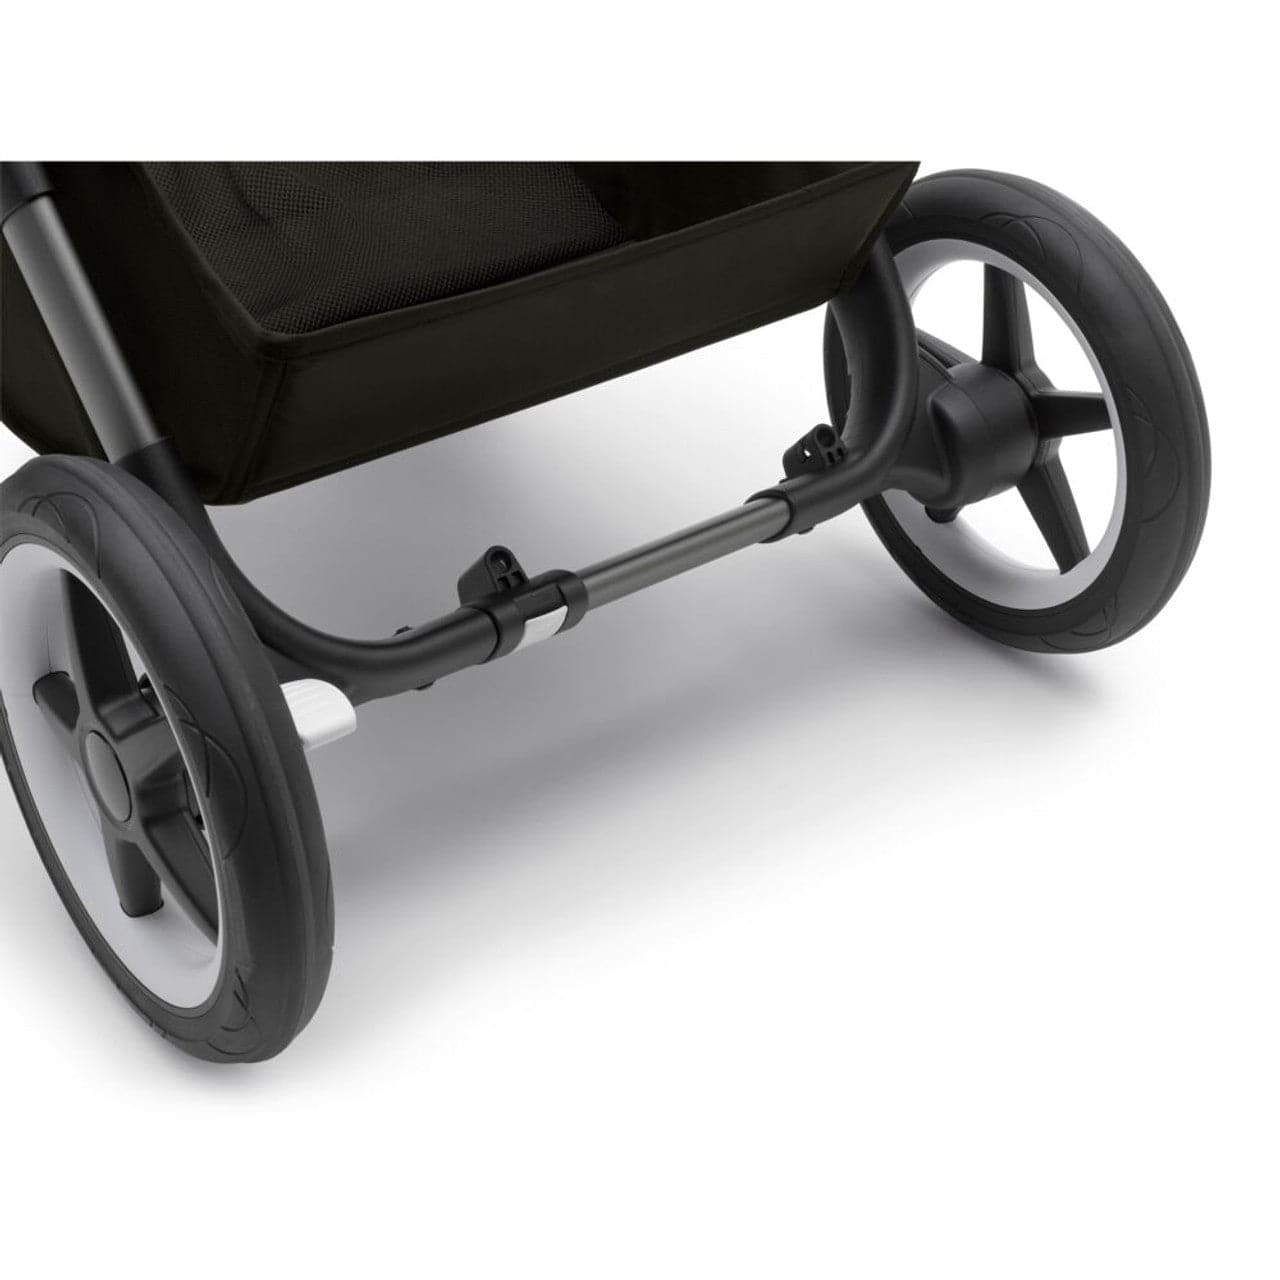 Bugaboo Donkey 5 Duo Travel System on Graphite/Grey Chassis + Turtle Air - Choose Your Colour - For Your Little One